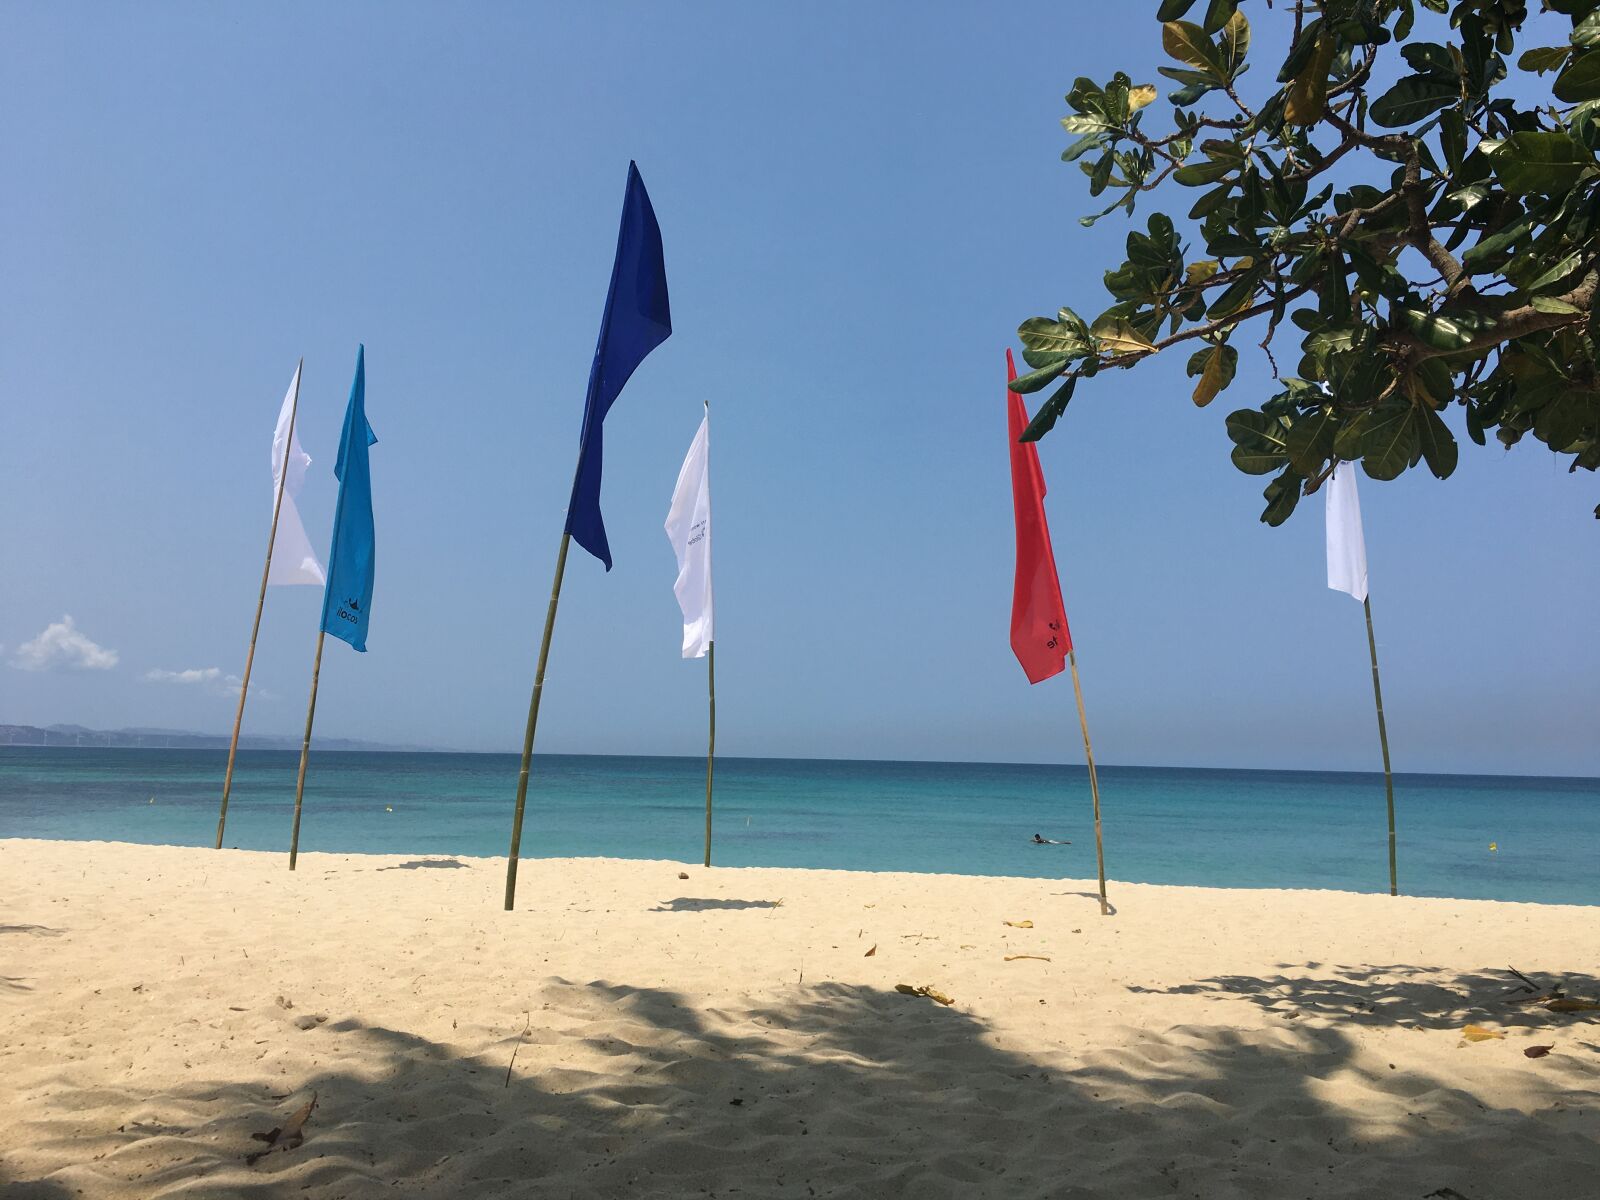 iPhone 6s back camera 4.15mm f/2.2 sample photo. Beach, philippines, summer photography